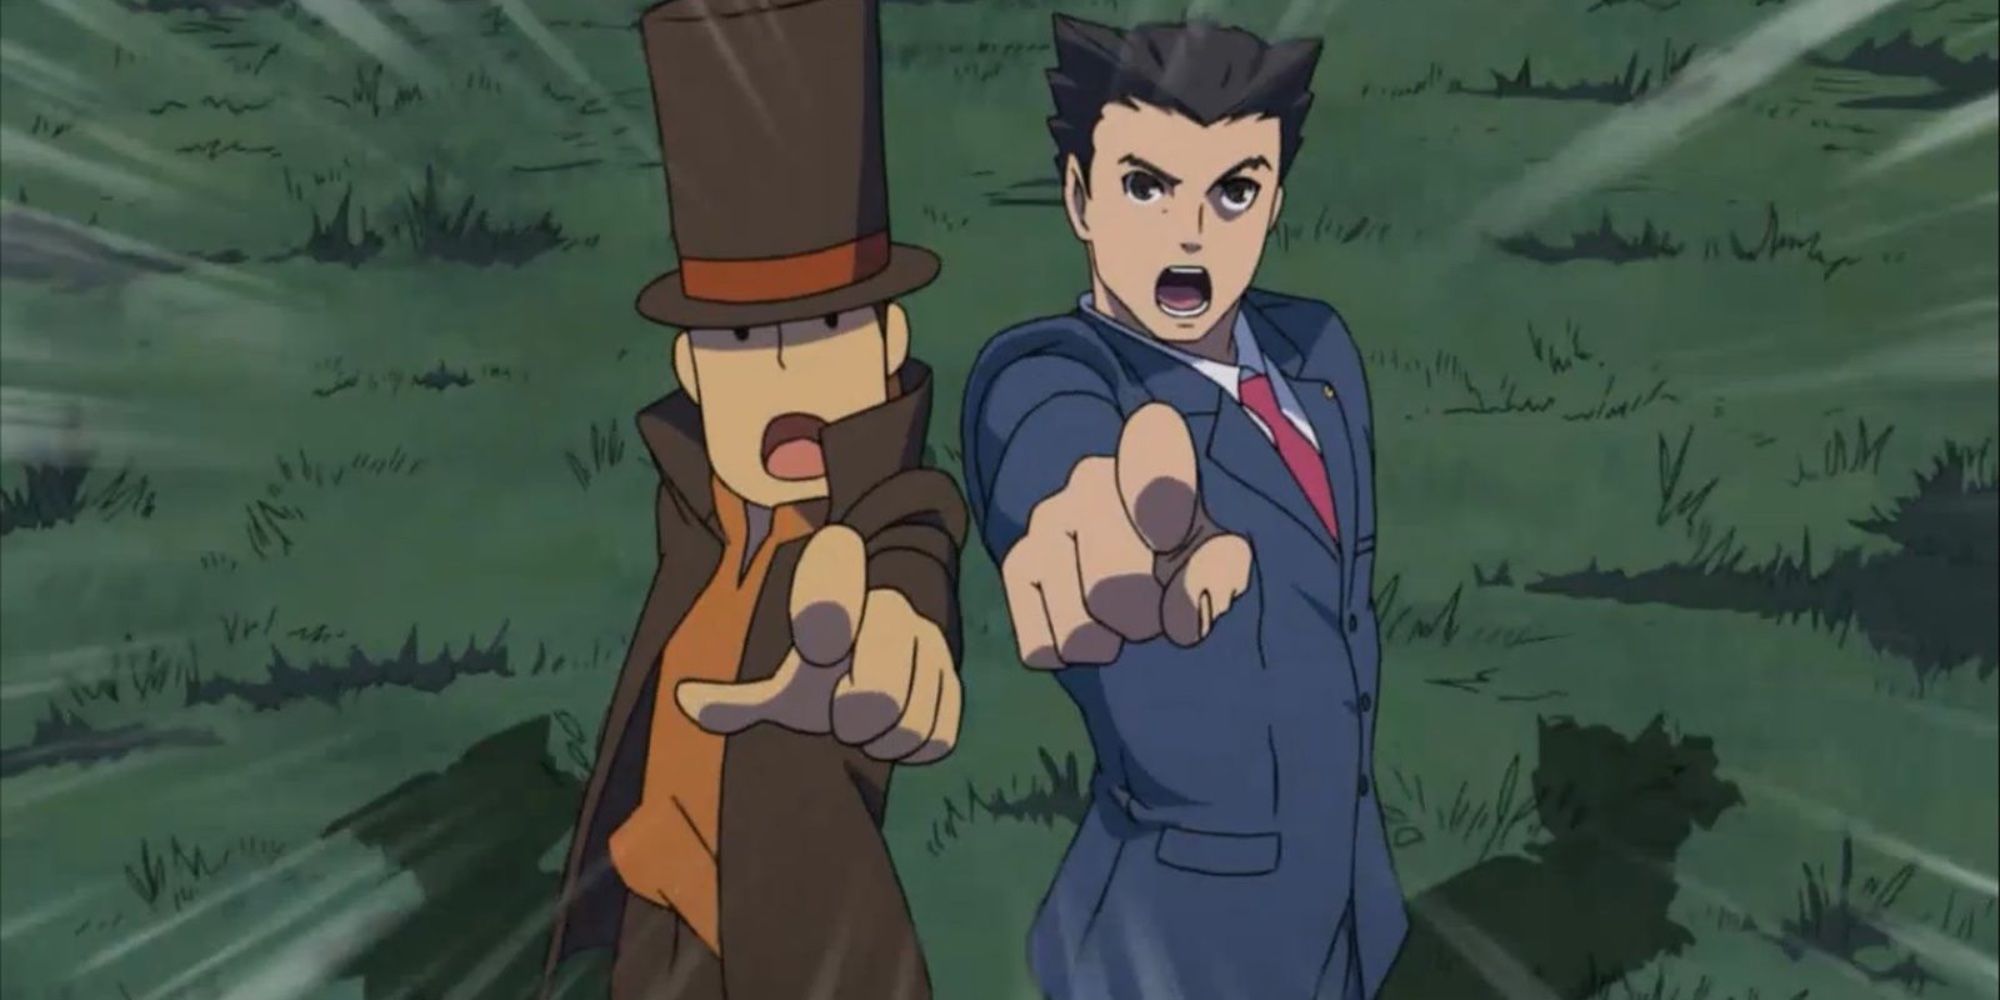 Professor Layton back to back with Phoenix Wright pointing to the sky